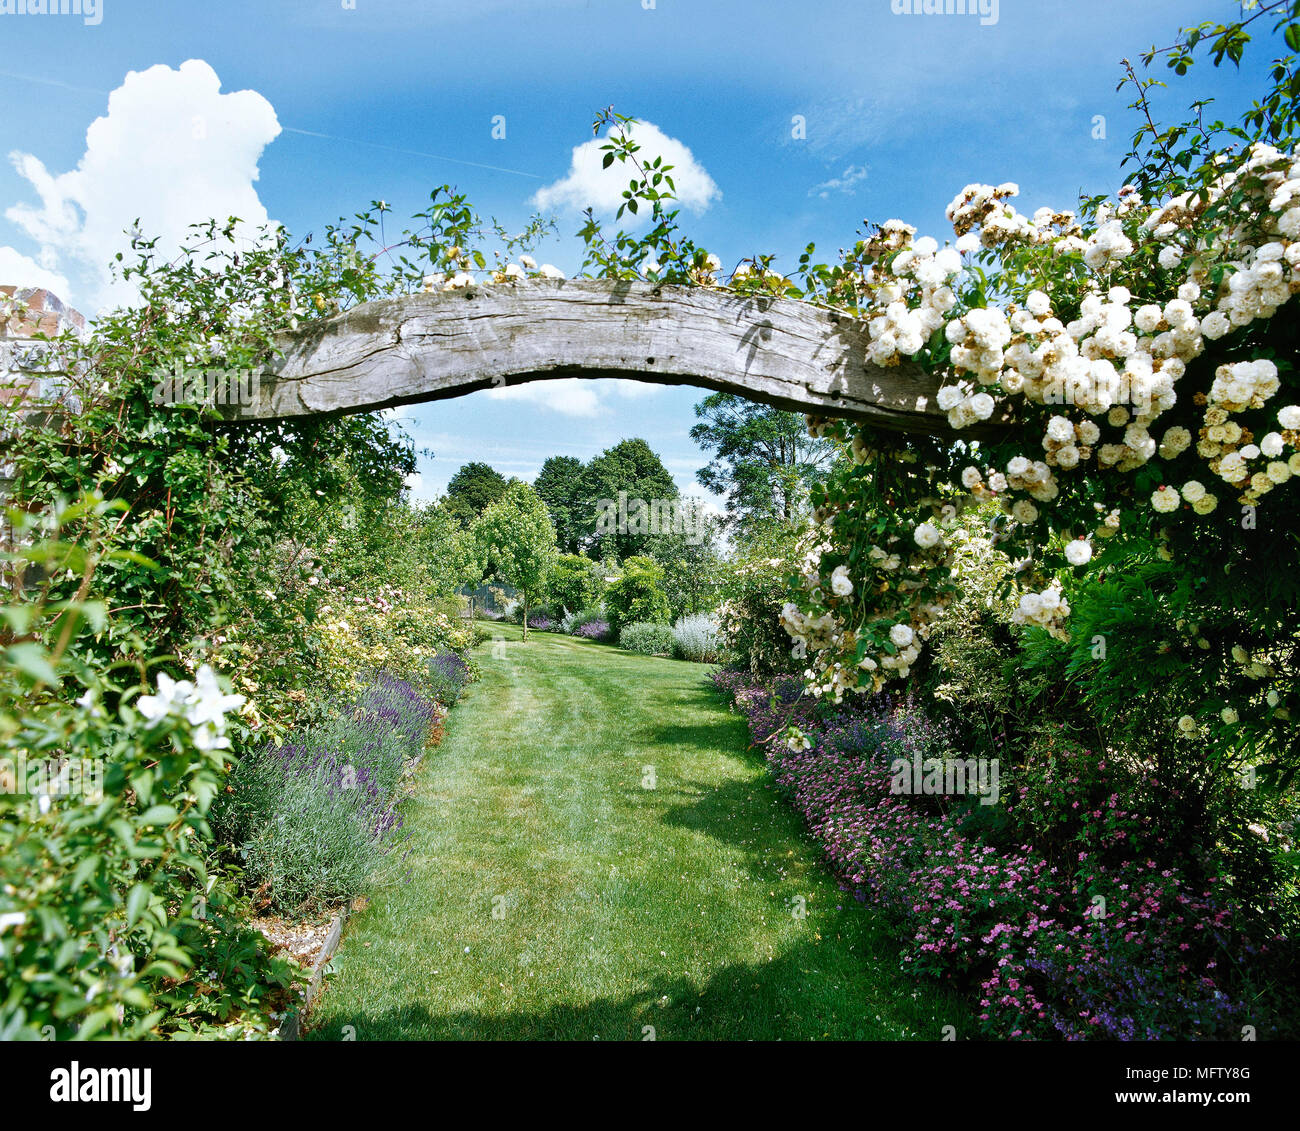 A country garden with an archway of an old wooden beam covered in climbing roses, lawn path and herbaceous border, Stock Photo